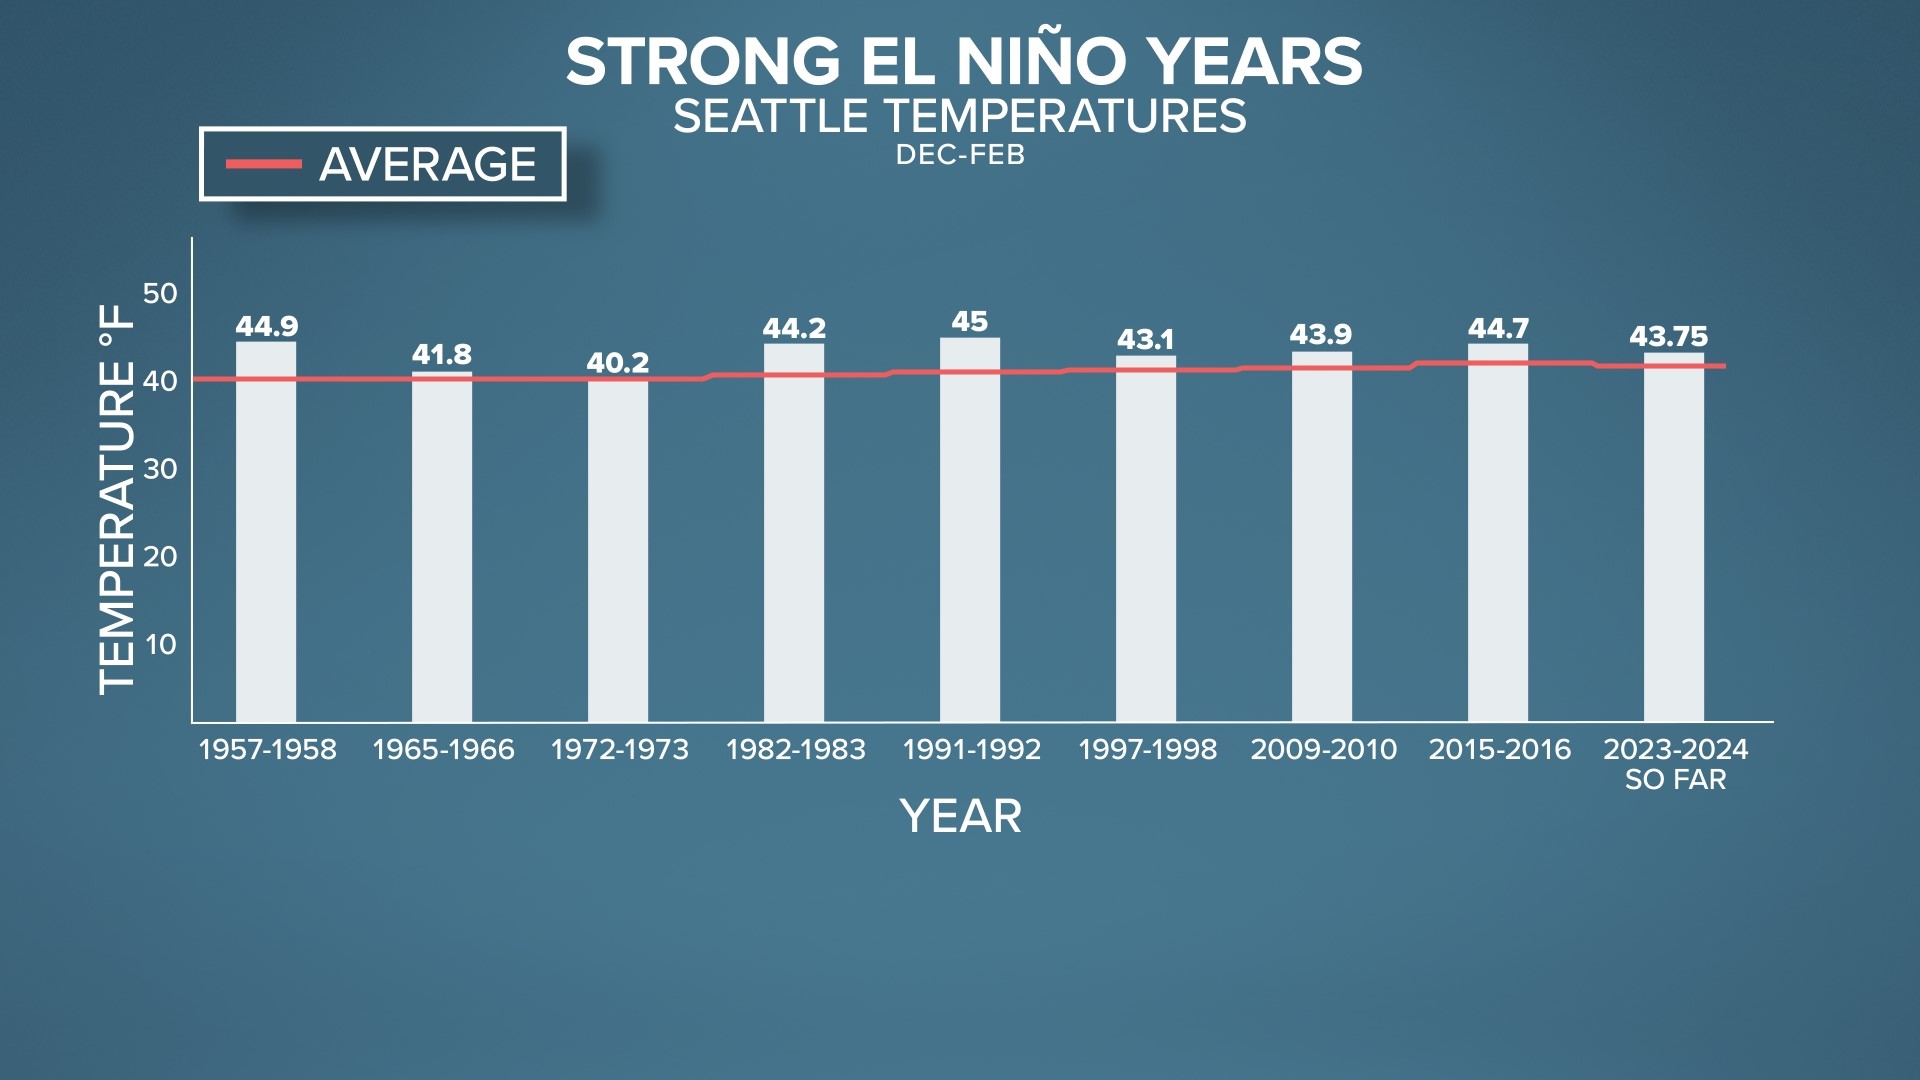 An El Niño trend looks at averages over multiple months, meaning it will rain and it will be cold at times, but overall averages tend to be tend to be warm and dry.